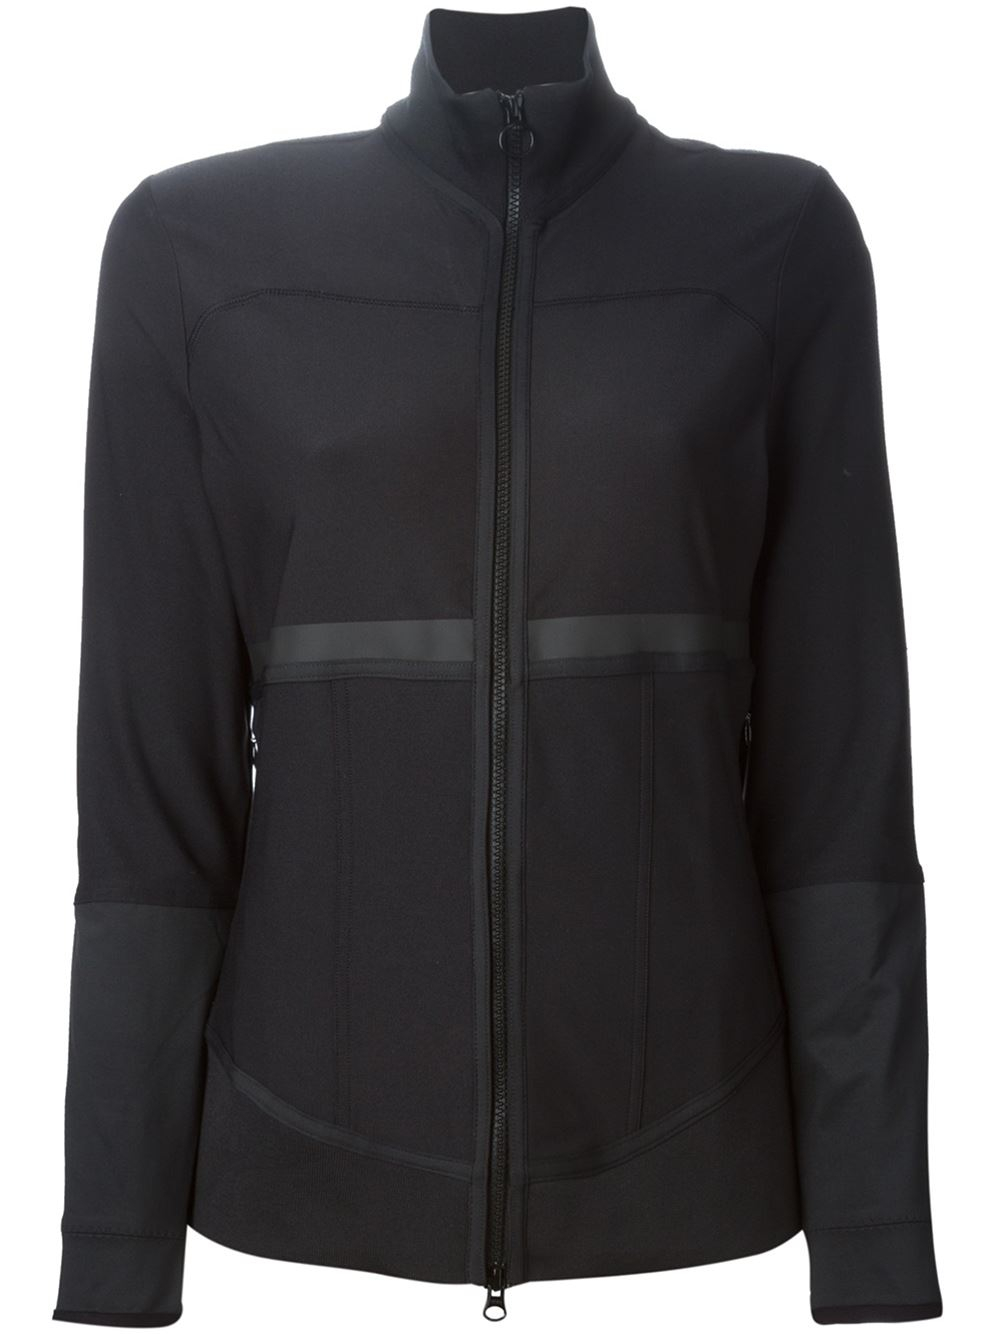 Adidas By Stella Mccartney Fitted Running Jacket in Black | Lyst